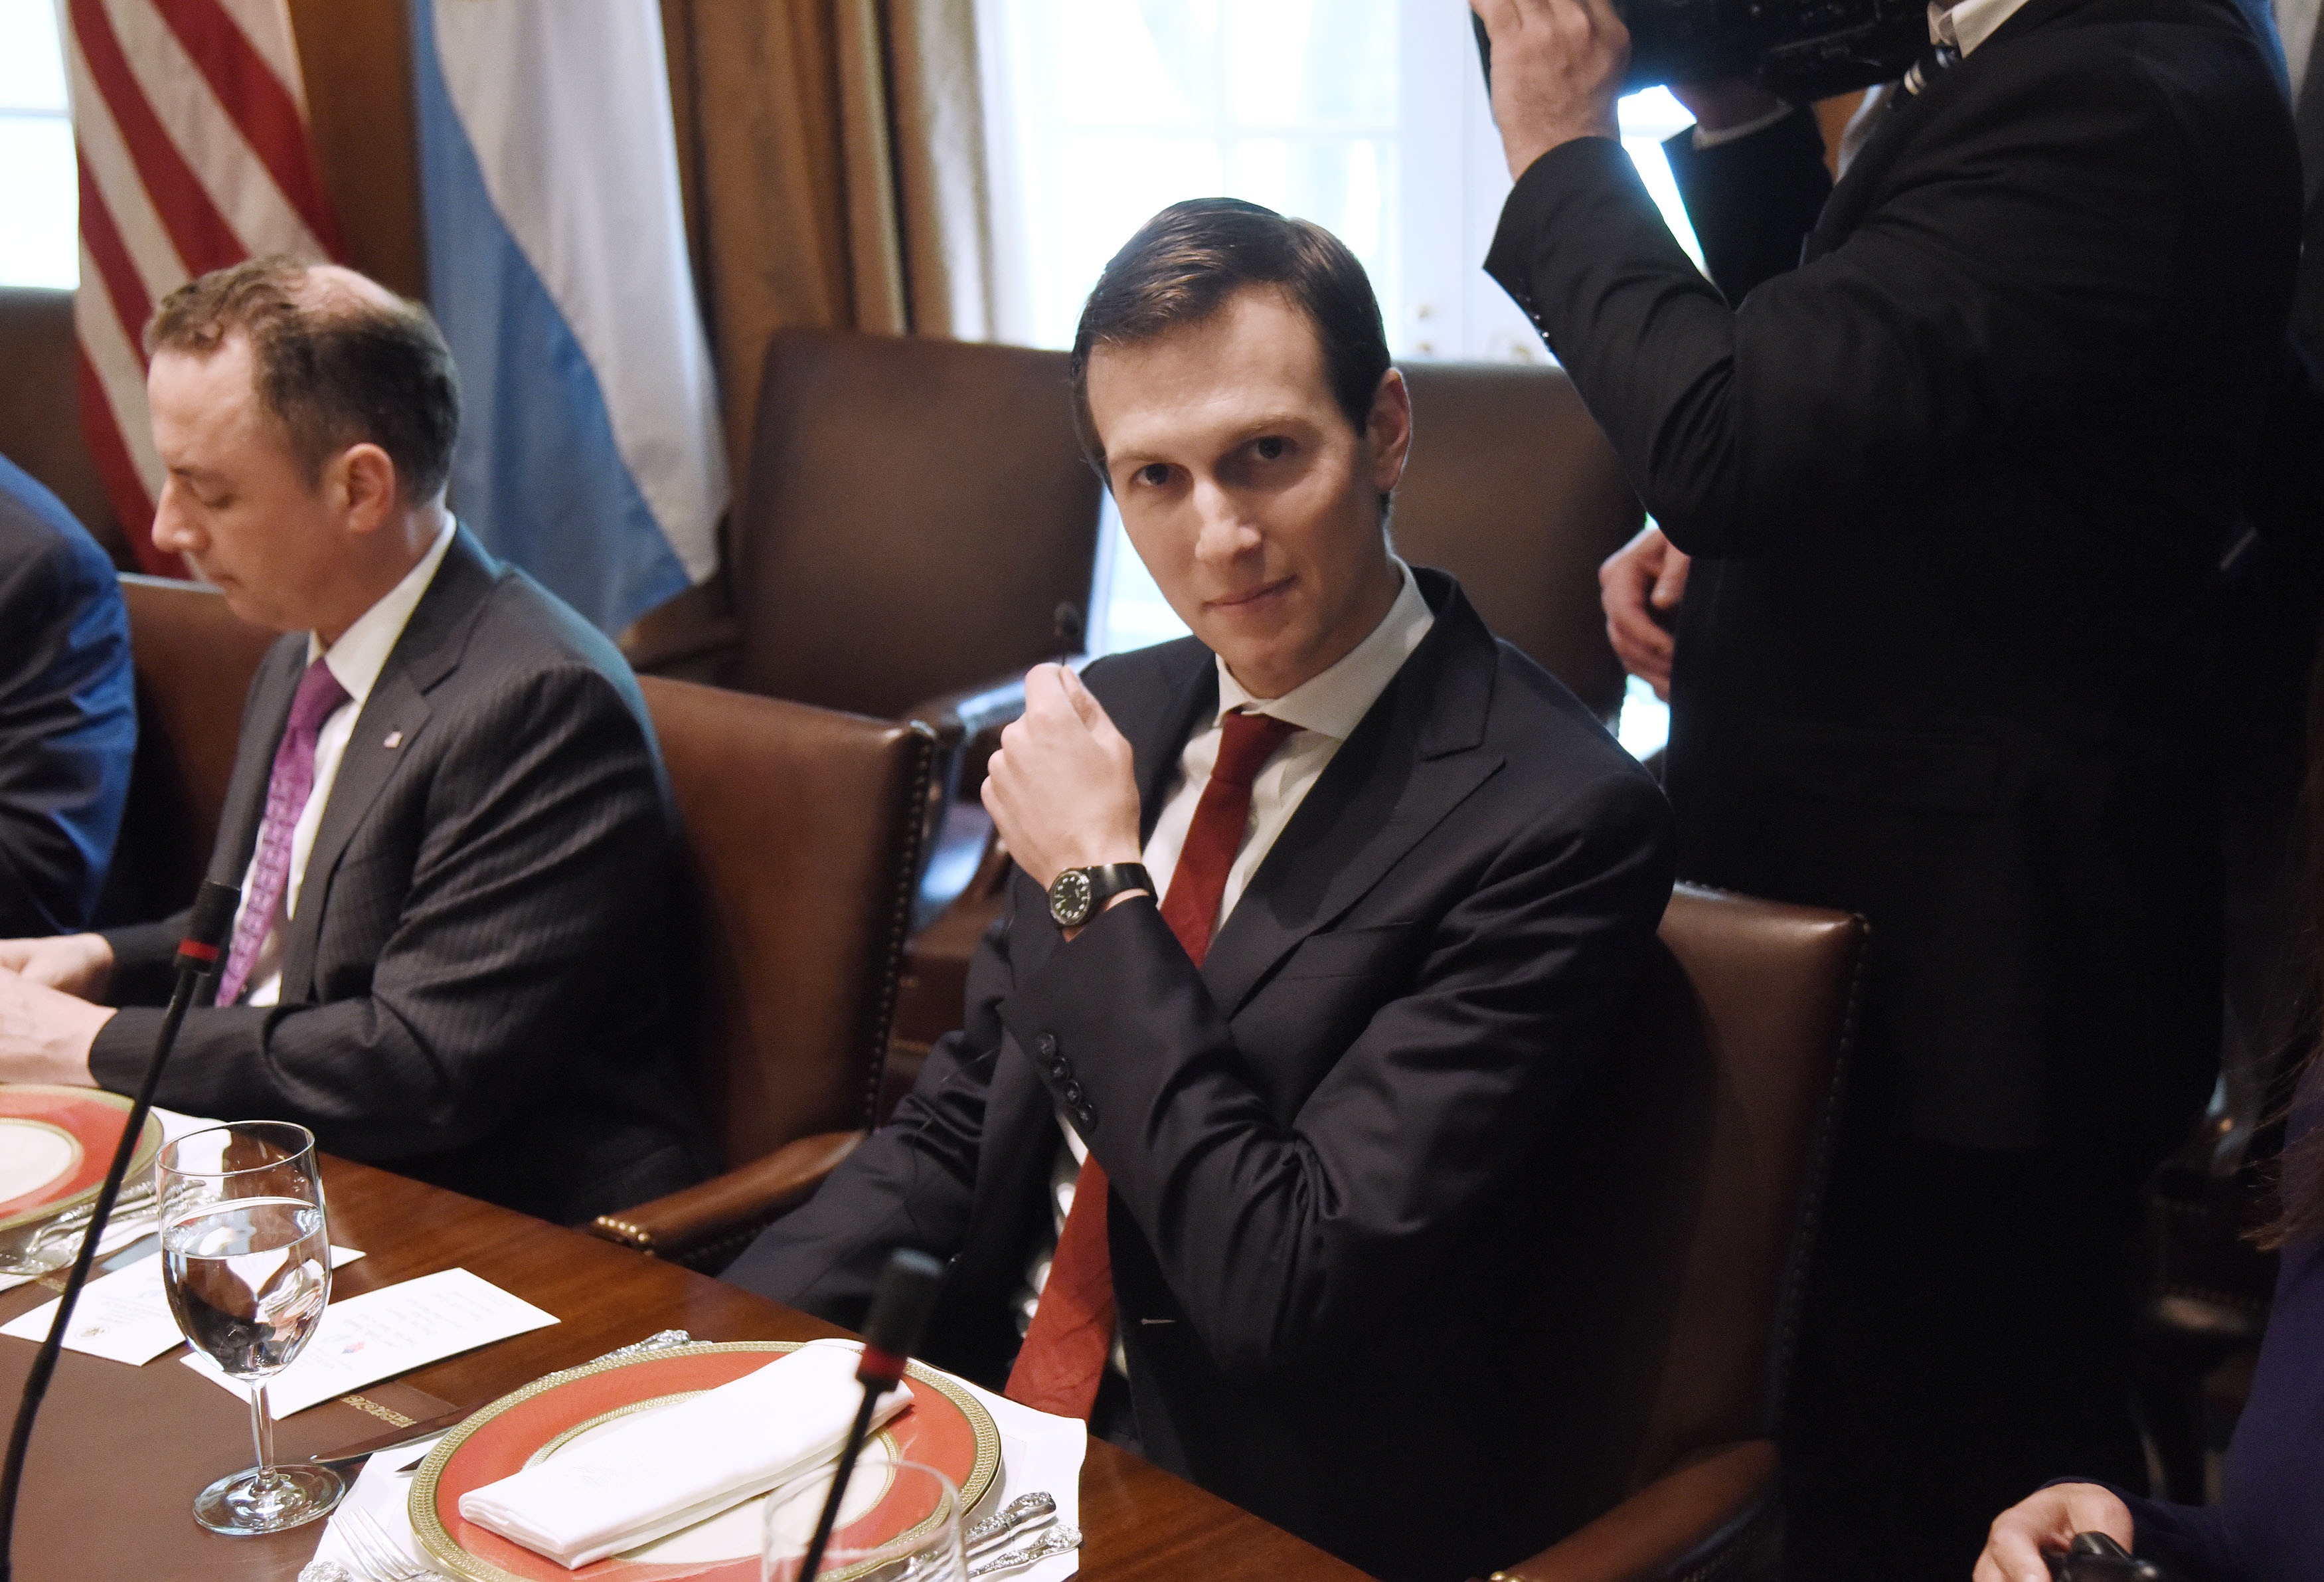 Senior adviser Jared Kushner looks on during a working luncheon with President Mauricio Macri of Argentina in the Cabinet Room of the White House on April 27, 2017 in Washington, D.C. (Olivier Douliery—Pool/Getty Images)